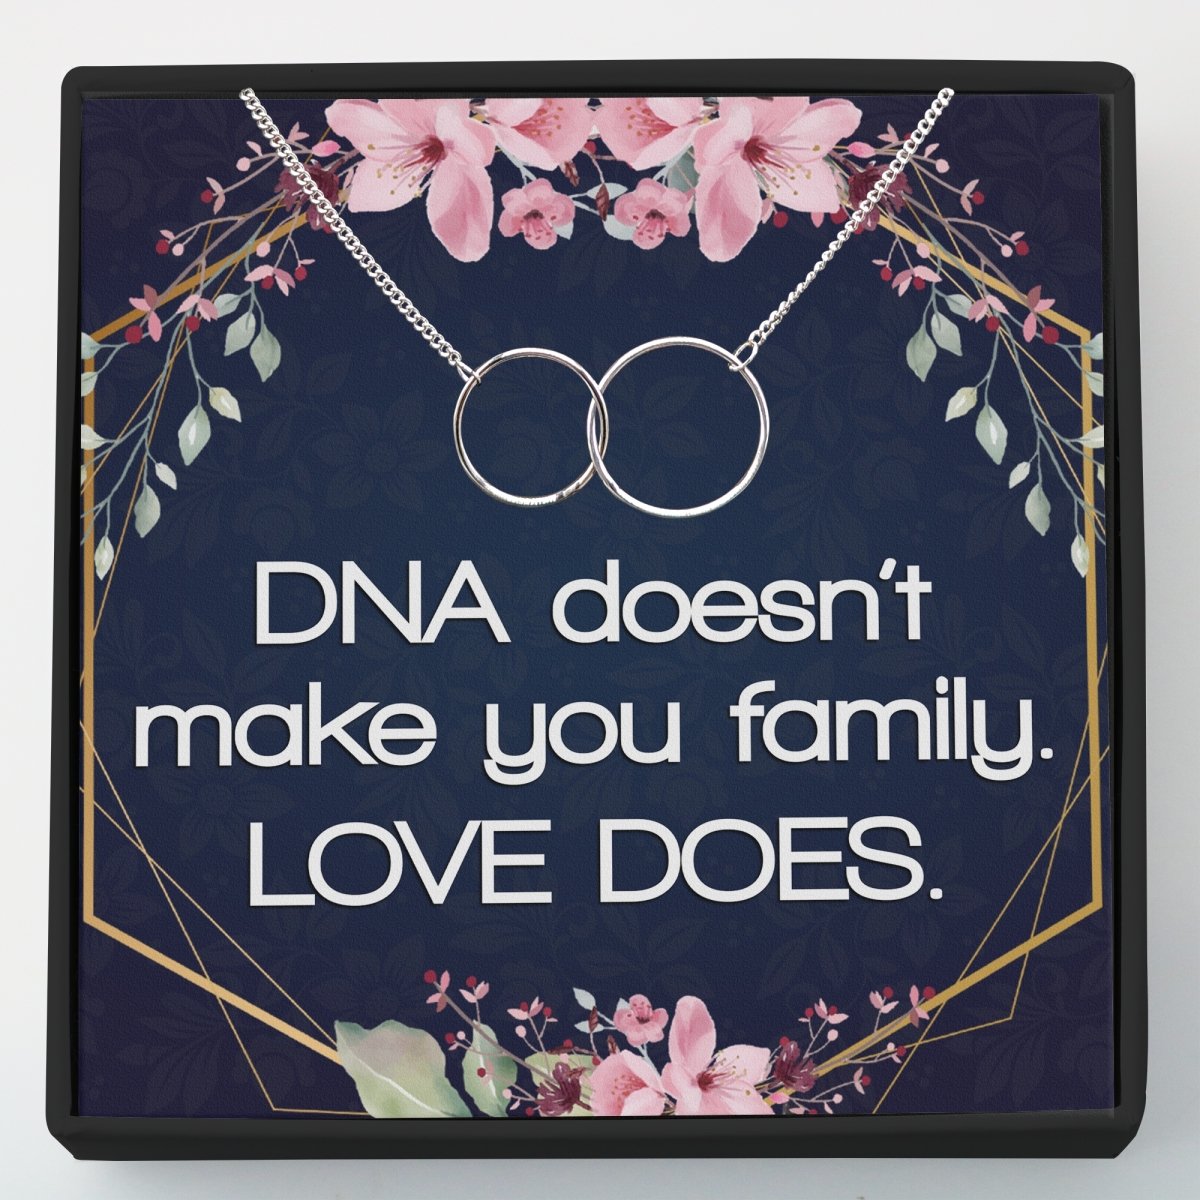 Interlocking Circles Necklace - DNA doesn't make you family, love does - Meaningful Cards